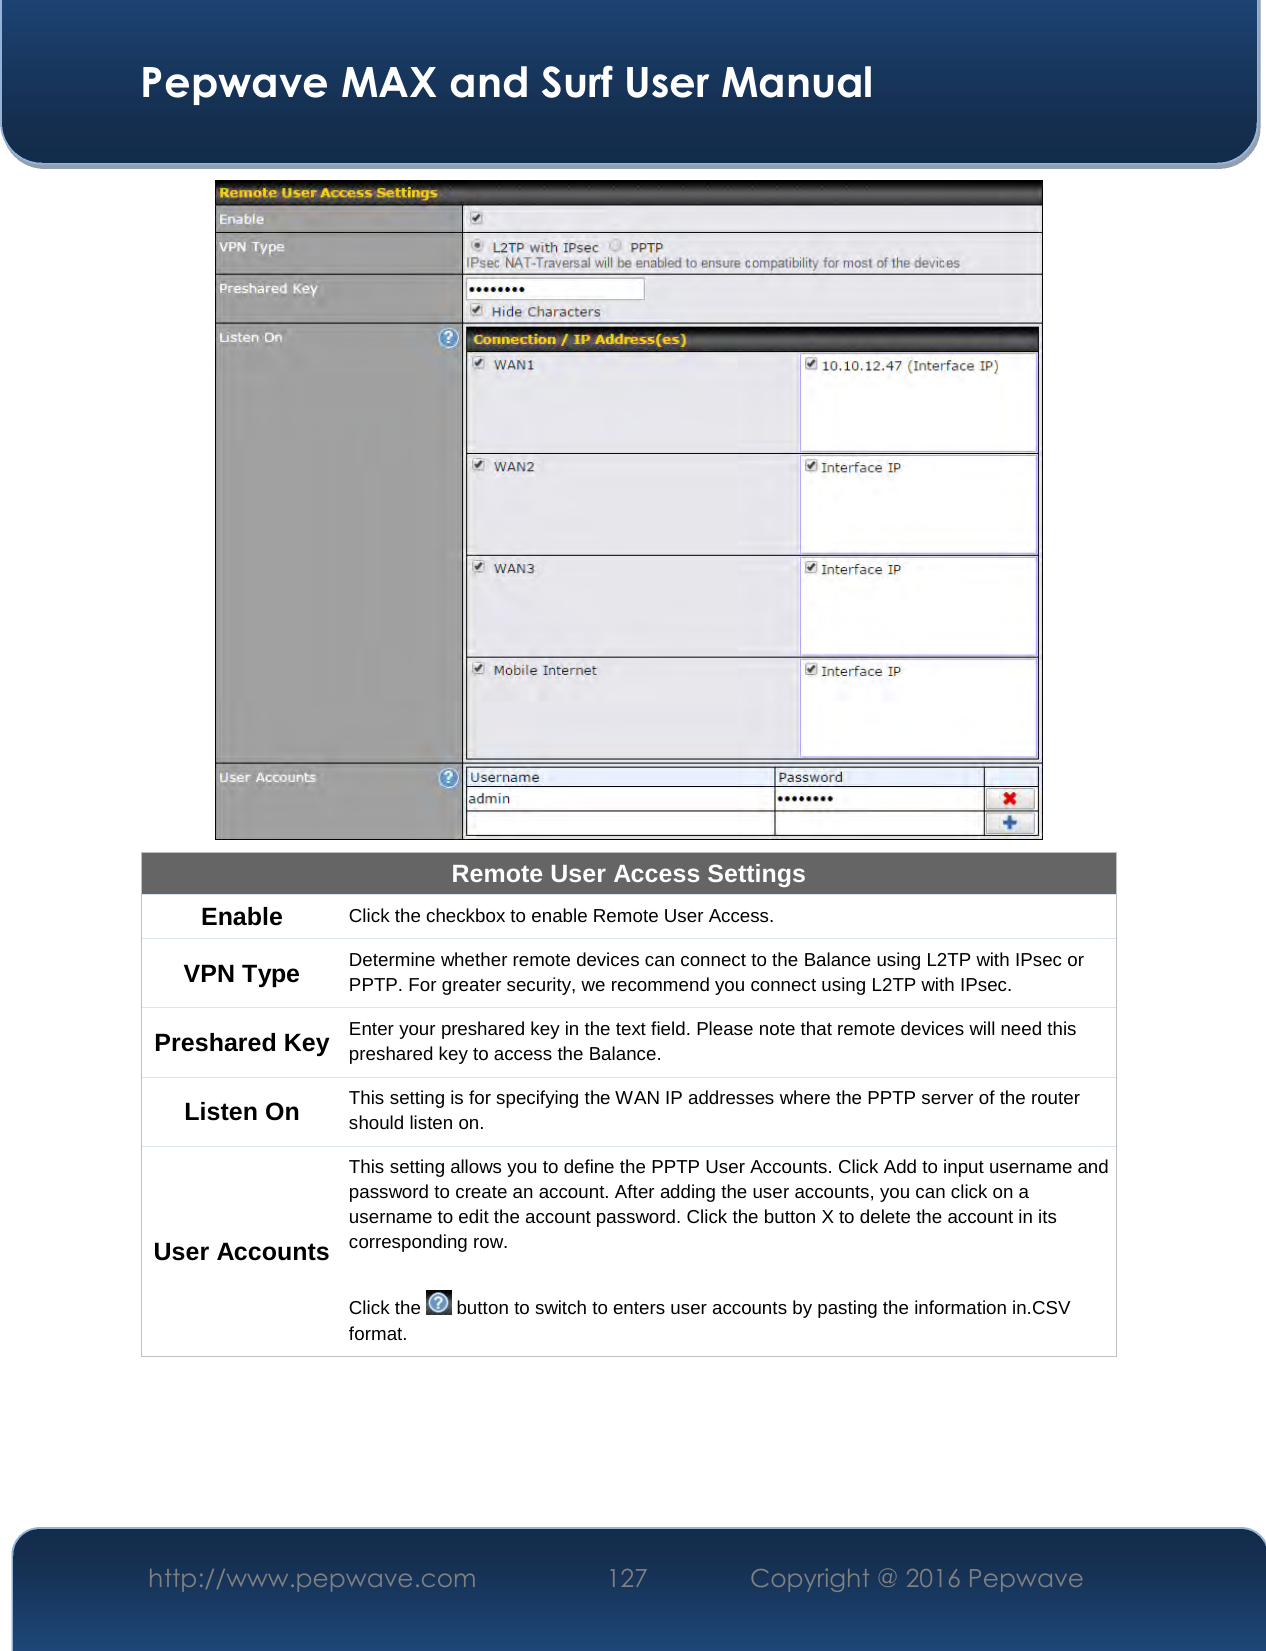  Pepwave MAX and Surf User Manual http://www.pepwave.com  127    Copyright @ 2016 Pepwave    Remote User Access Settings Enable  Click the checkbox to enable Remote User Access. VPN Type  Determine whether remote devices can connect to the Balance using L2TP with IPsec or PPTP. For greater security, we recommend you connect using L2TP with IPsec. Preshared Key Enter your preshared key in the text field. Please note that remote devices will need this preshared key to access the Balance. Listen On  This setting is for specifying the WAN IP addresses where the PPTP server of the router should listen on. User Accounts This setting allows you to define the PPTP User Accounts. Click Add to input username and password to create an account. After adding the user accounts, you can click on a username to edit the account password. Click the button X to delete the account in its corresponding row.  Click the   button to switch to enters user accounts by pasting the information in.CSV format.  